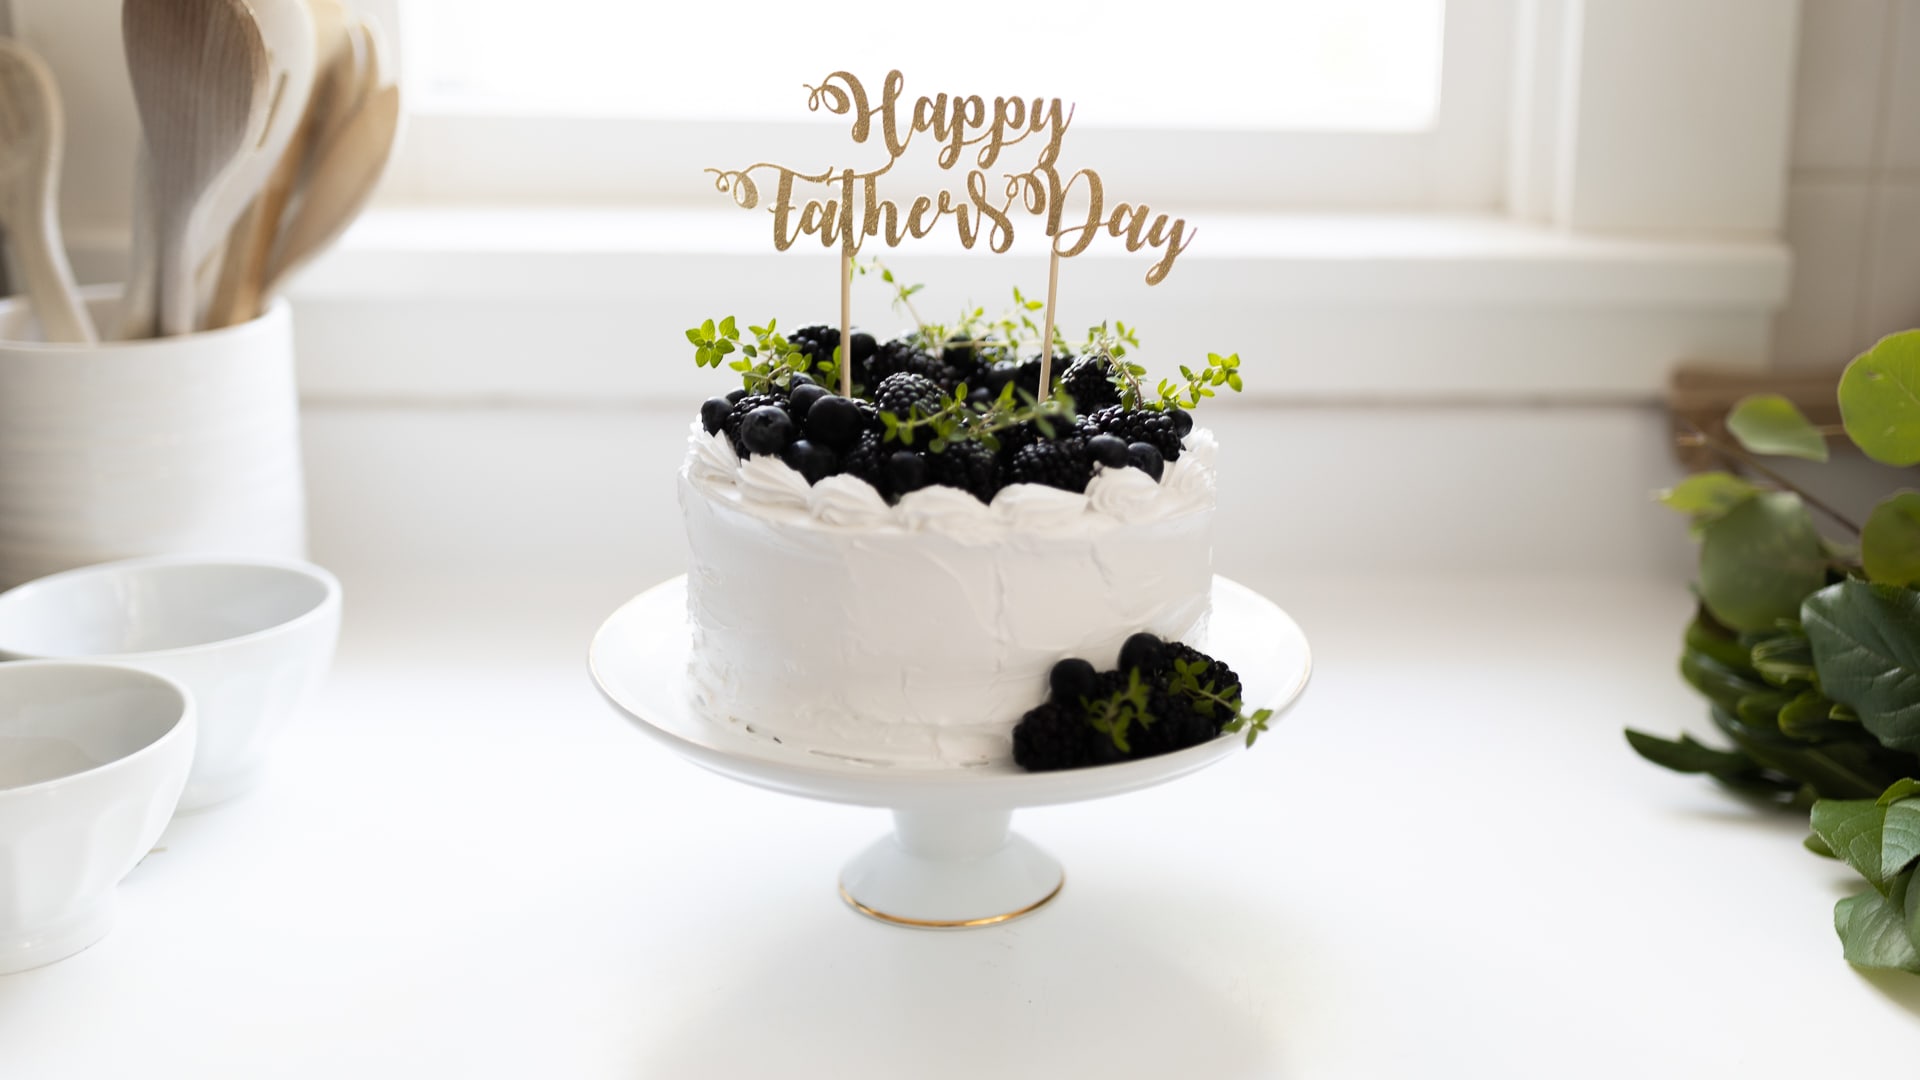 Use a Silhouette machine to decorate plain cake carriers.